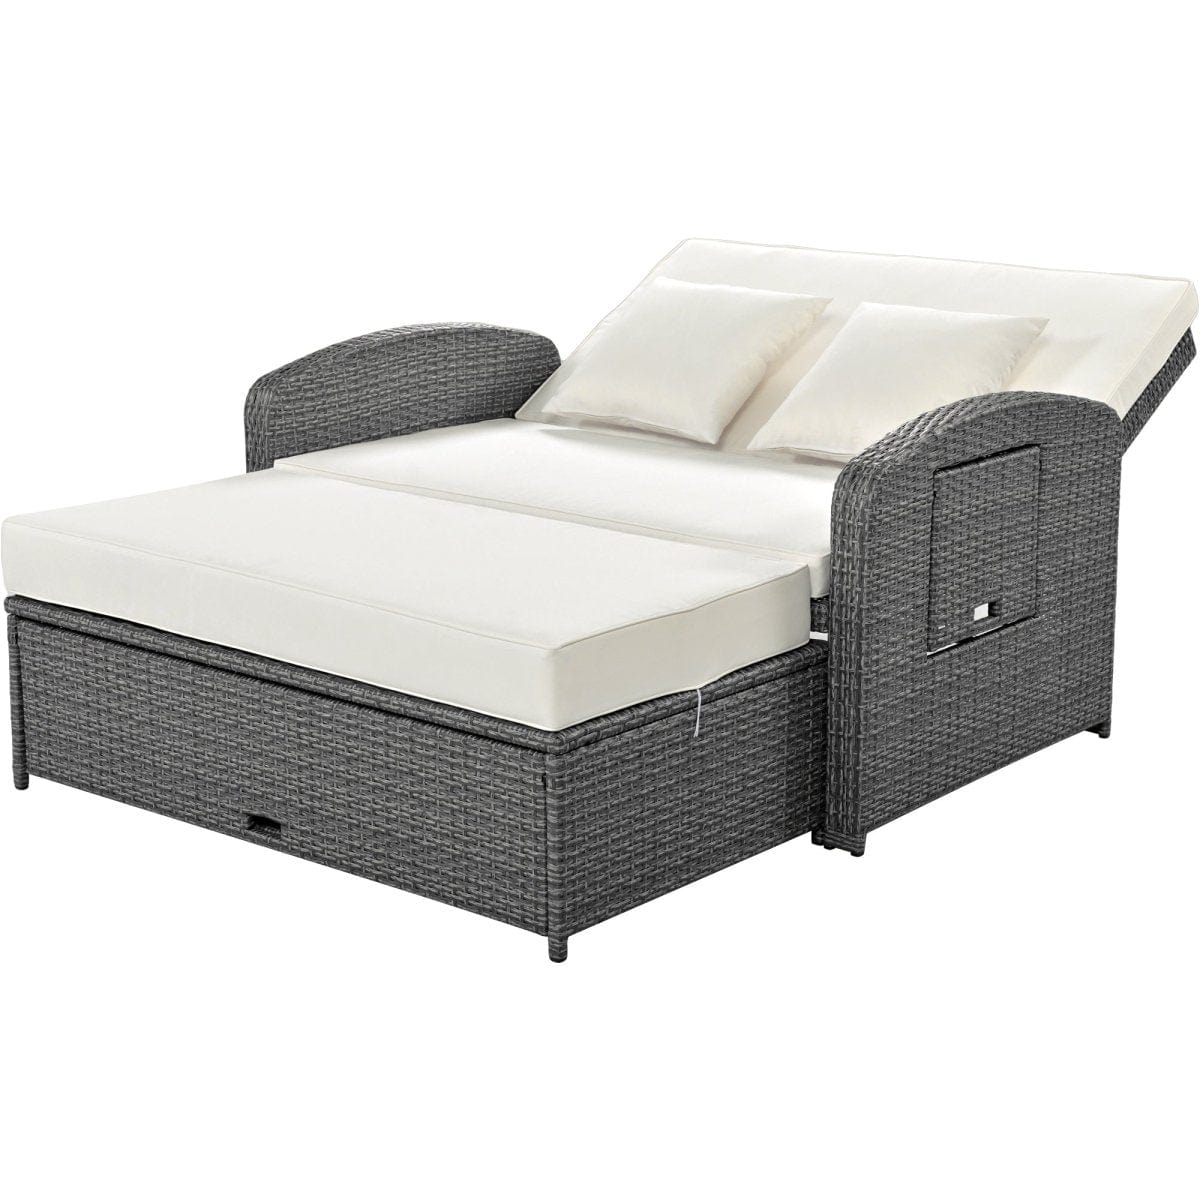 2 Person Outdoor Daybed with Built-in Tables14Topmaxx